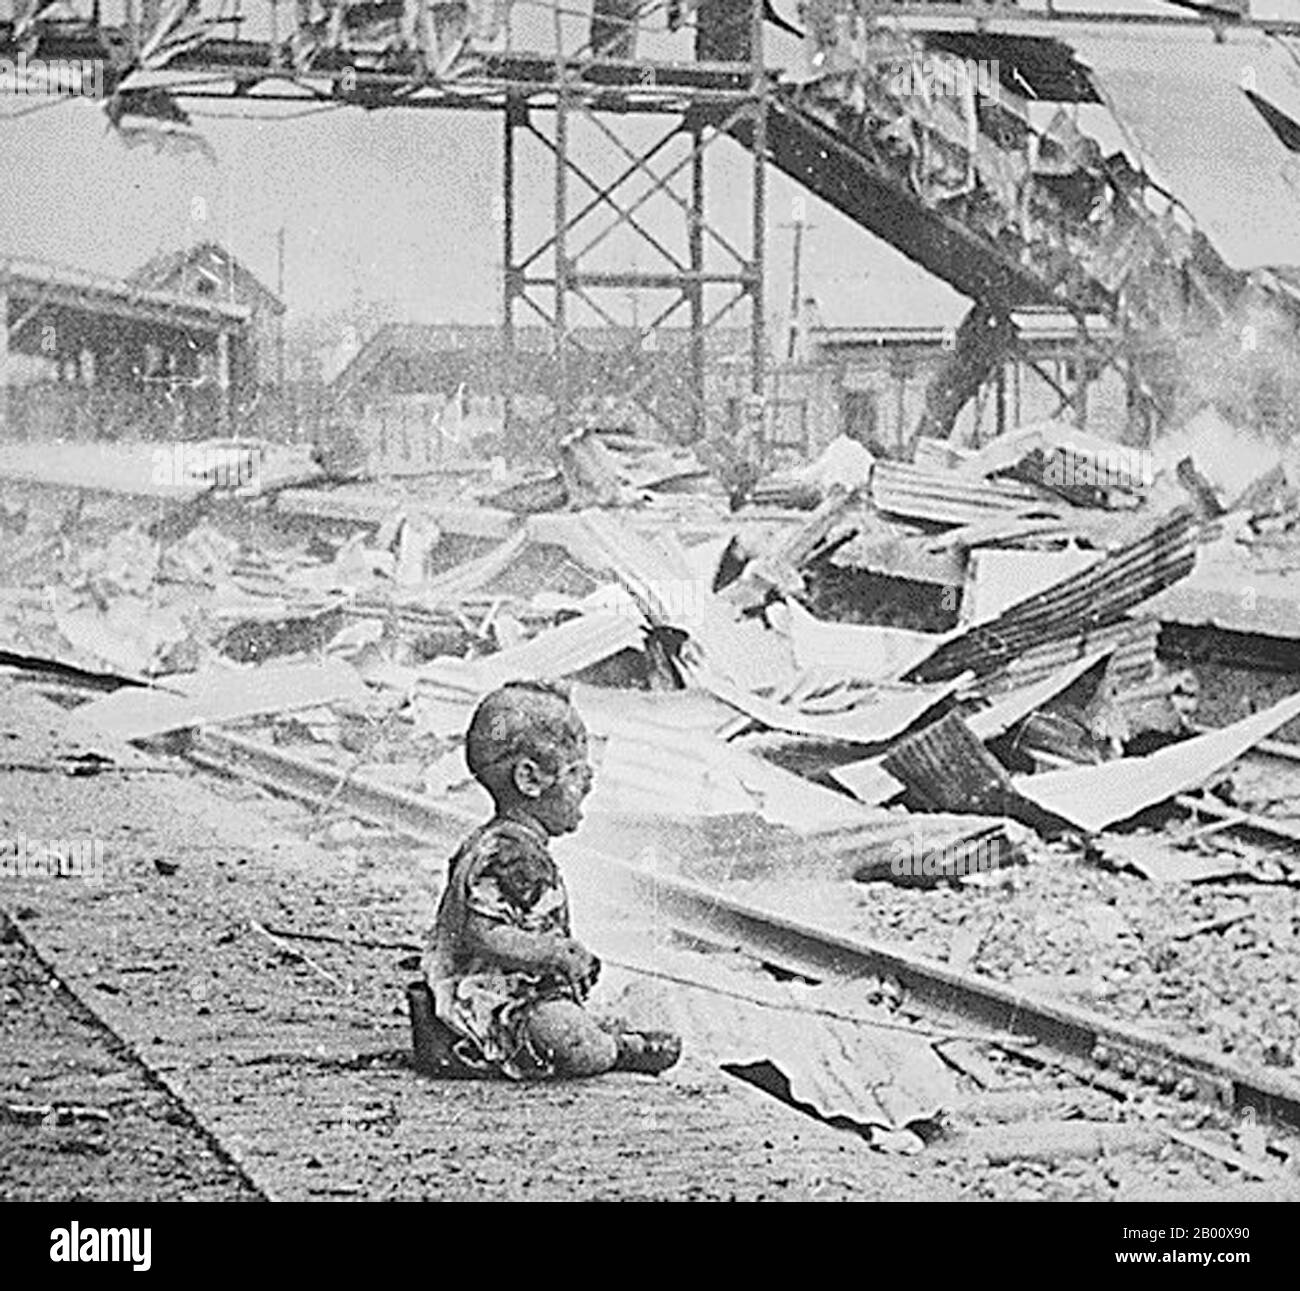 China: 'Bloody Saturday'. A terrified Chinese baby, one of the last humans left alive after intense bombing during the Japanese attack on Shanghai's South Station. August 1937.  The Second Sino-Japanese War (July 7, 1937 – September 9, 1945) was a military conflict fought primarily between the Republic of China and the Empire of Japan. After the Japanese attack on Pearl Harbor, the war merged into the greater conflict of World War II as a major front of what is broadly known as the Pacific War. Although the two countries had fought intermittently since 1931, total war started in 1937. Stock Photo